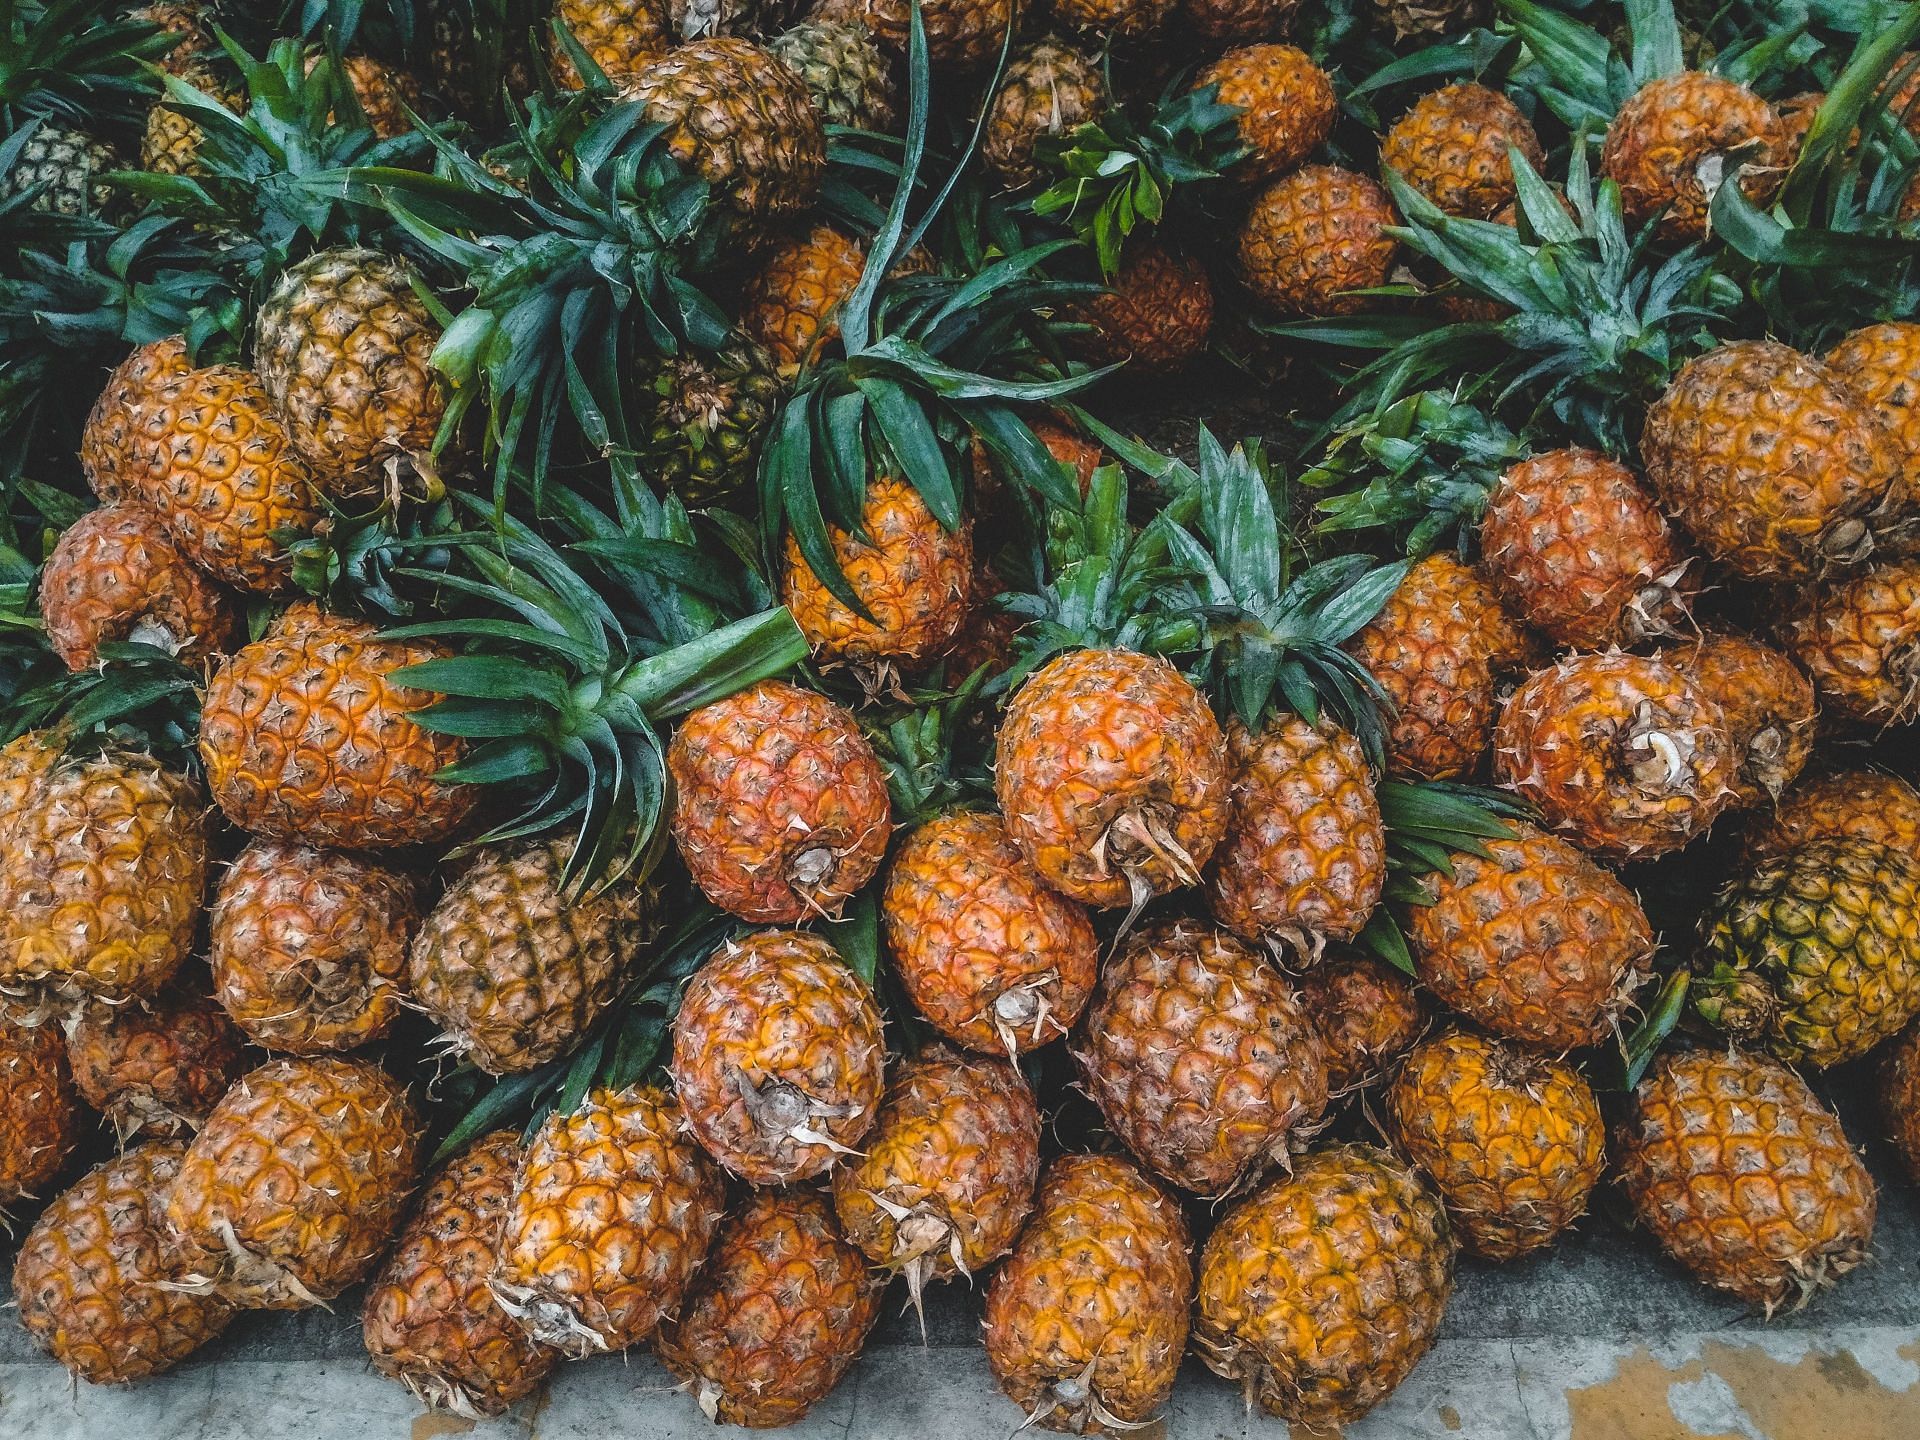 Bromelain is extracted from pineapples (Image via Pexels)